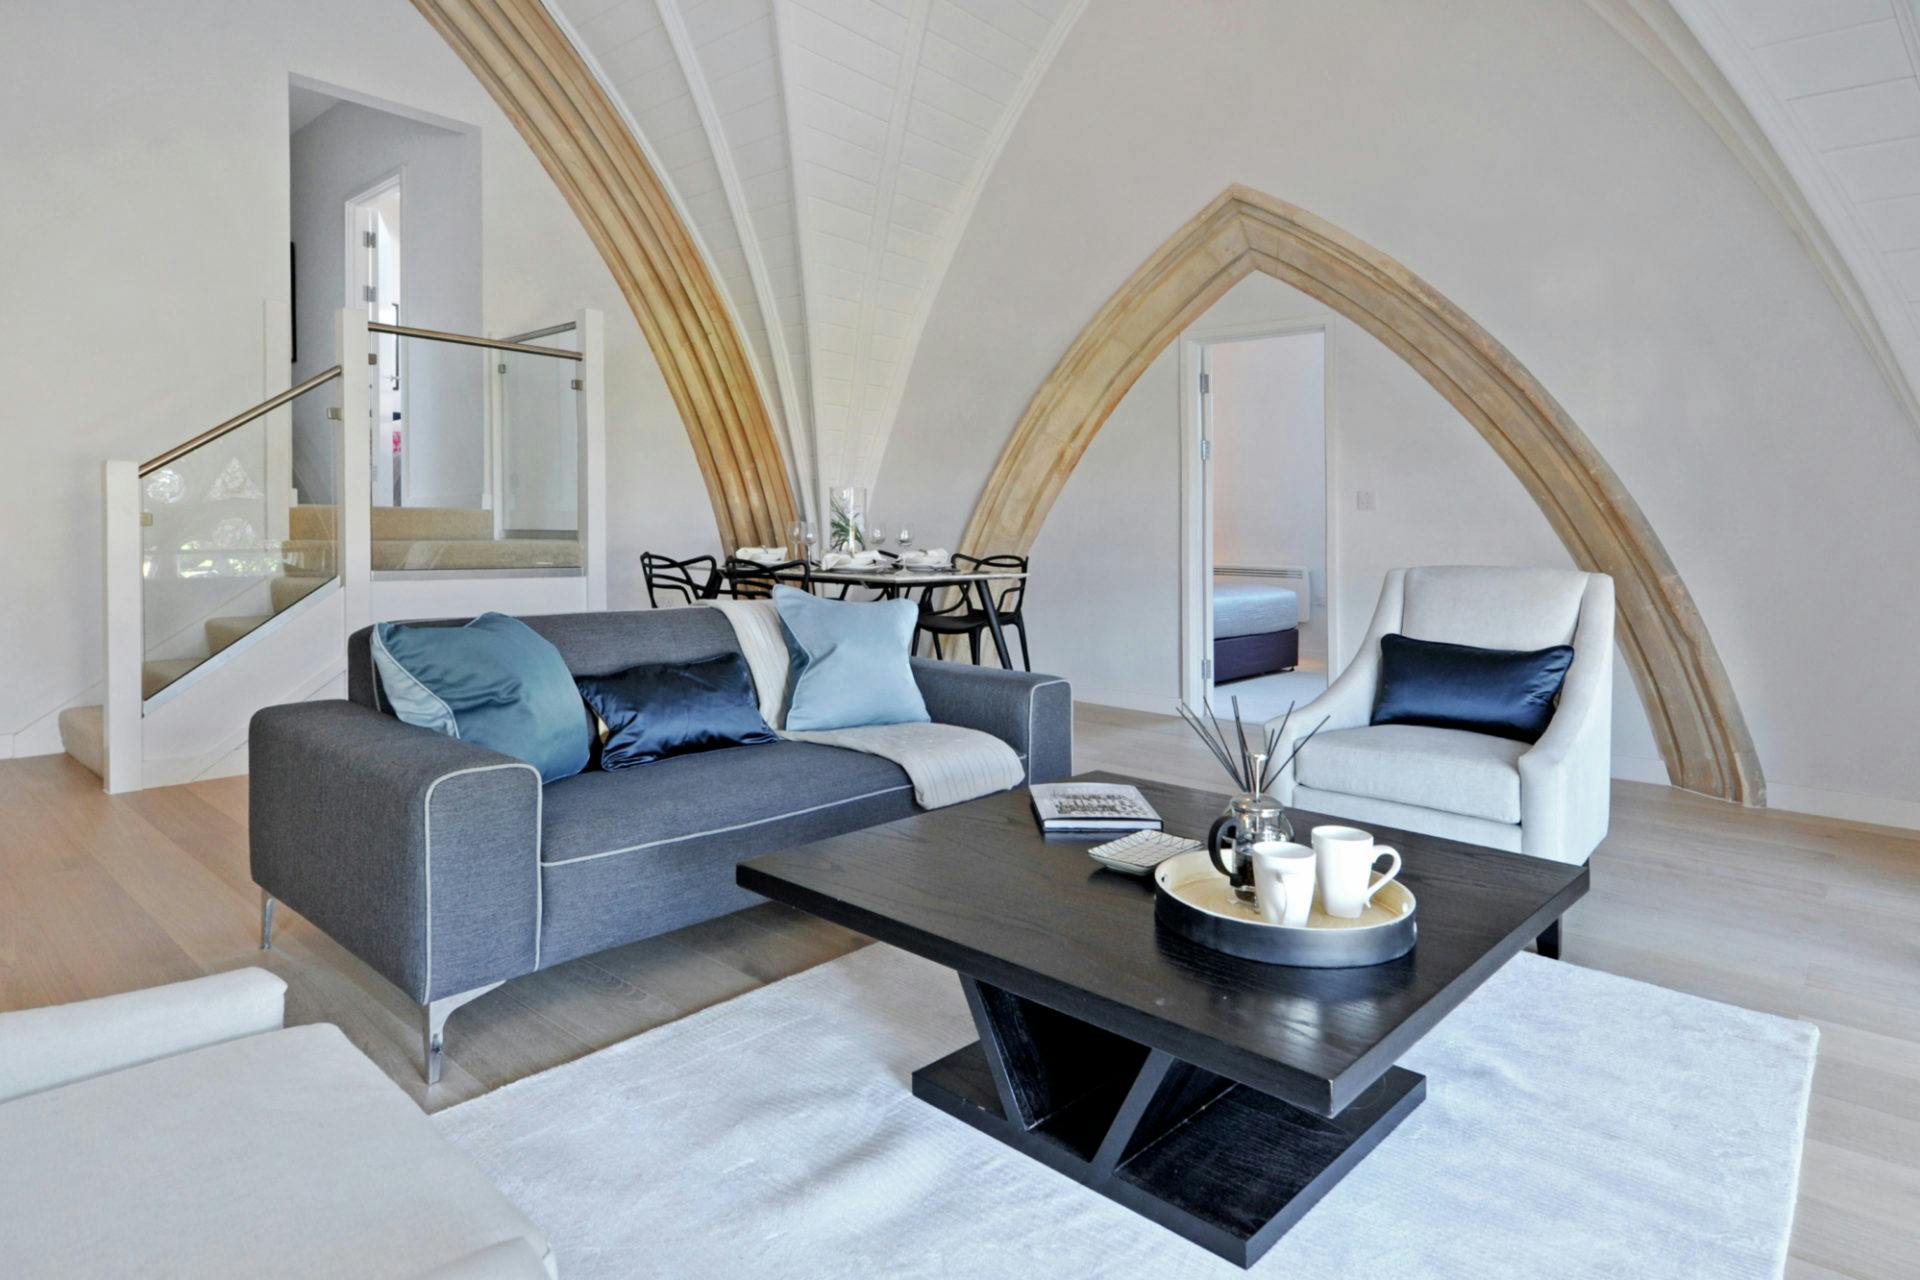 Spacious living room with vaulted ceilings, a grey sofa, white armchair, and a wooden arch leading to another room.